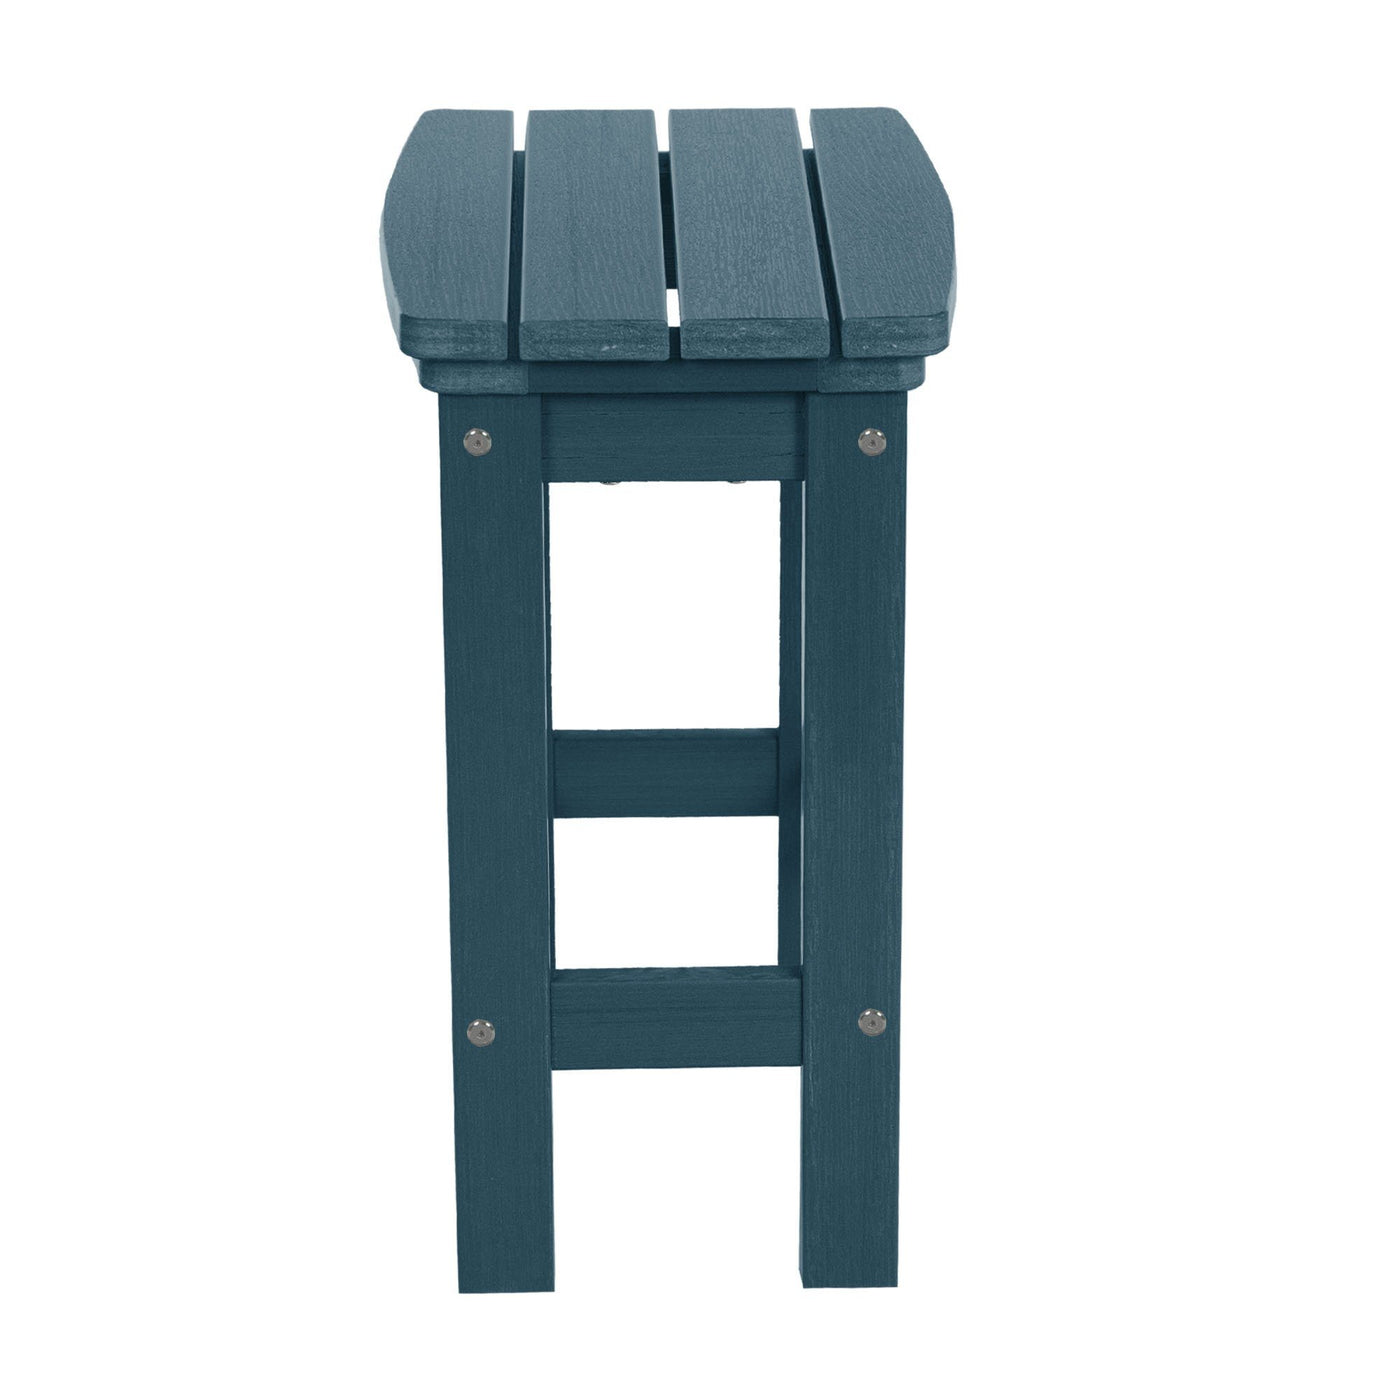 Side view of Lehigh counter height stool in Nantucket blue